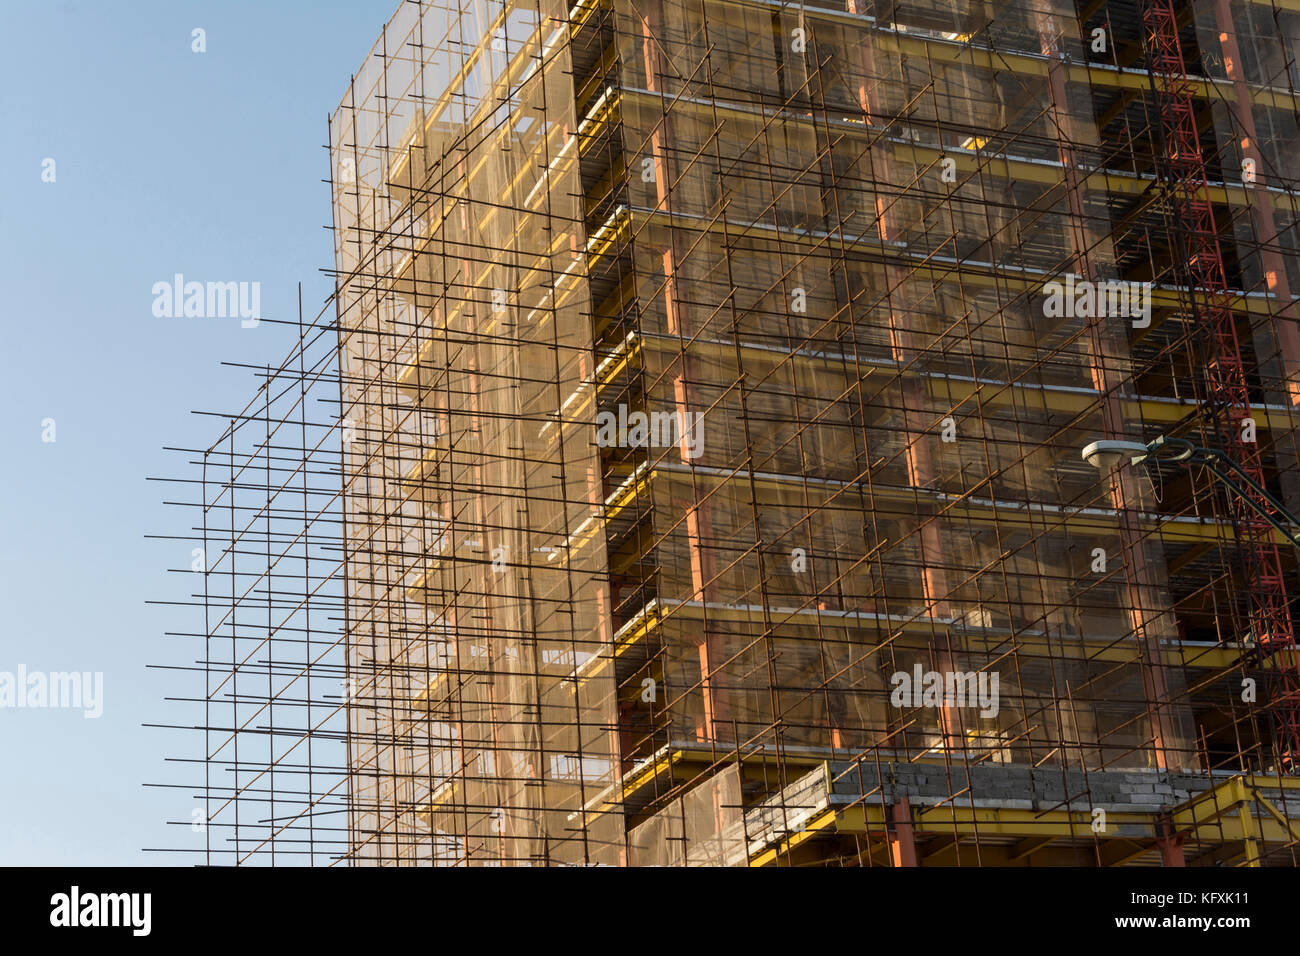 Under Construction Building Covered By Multiple Metal Rods Stock Photo